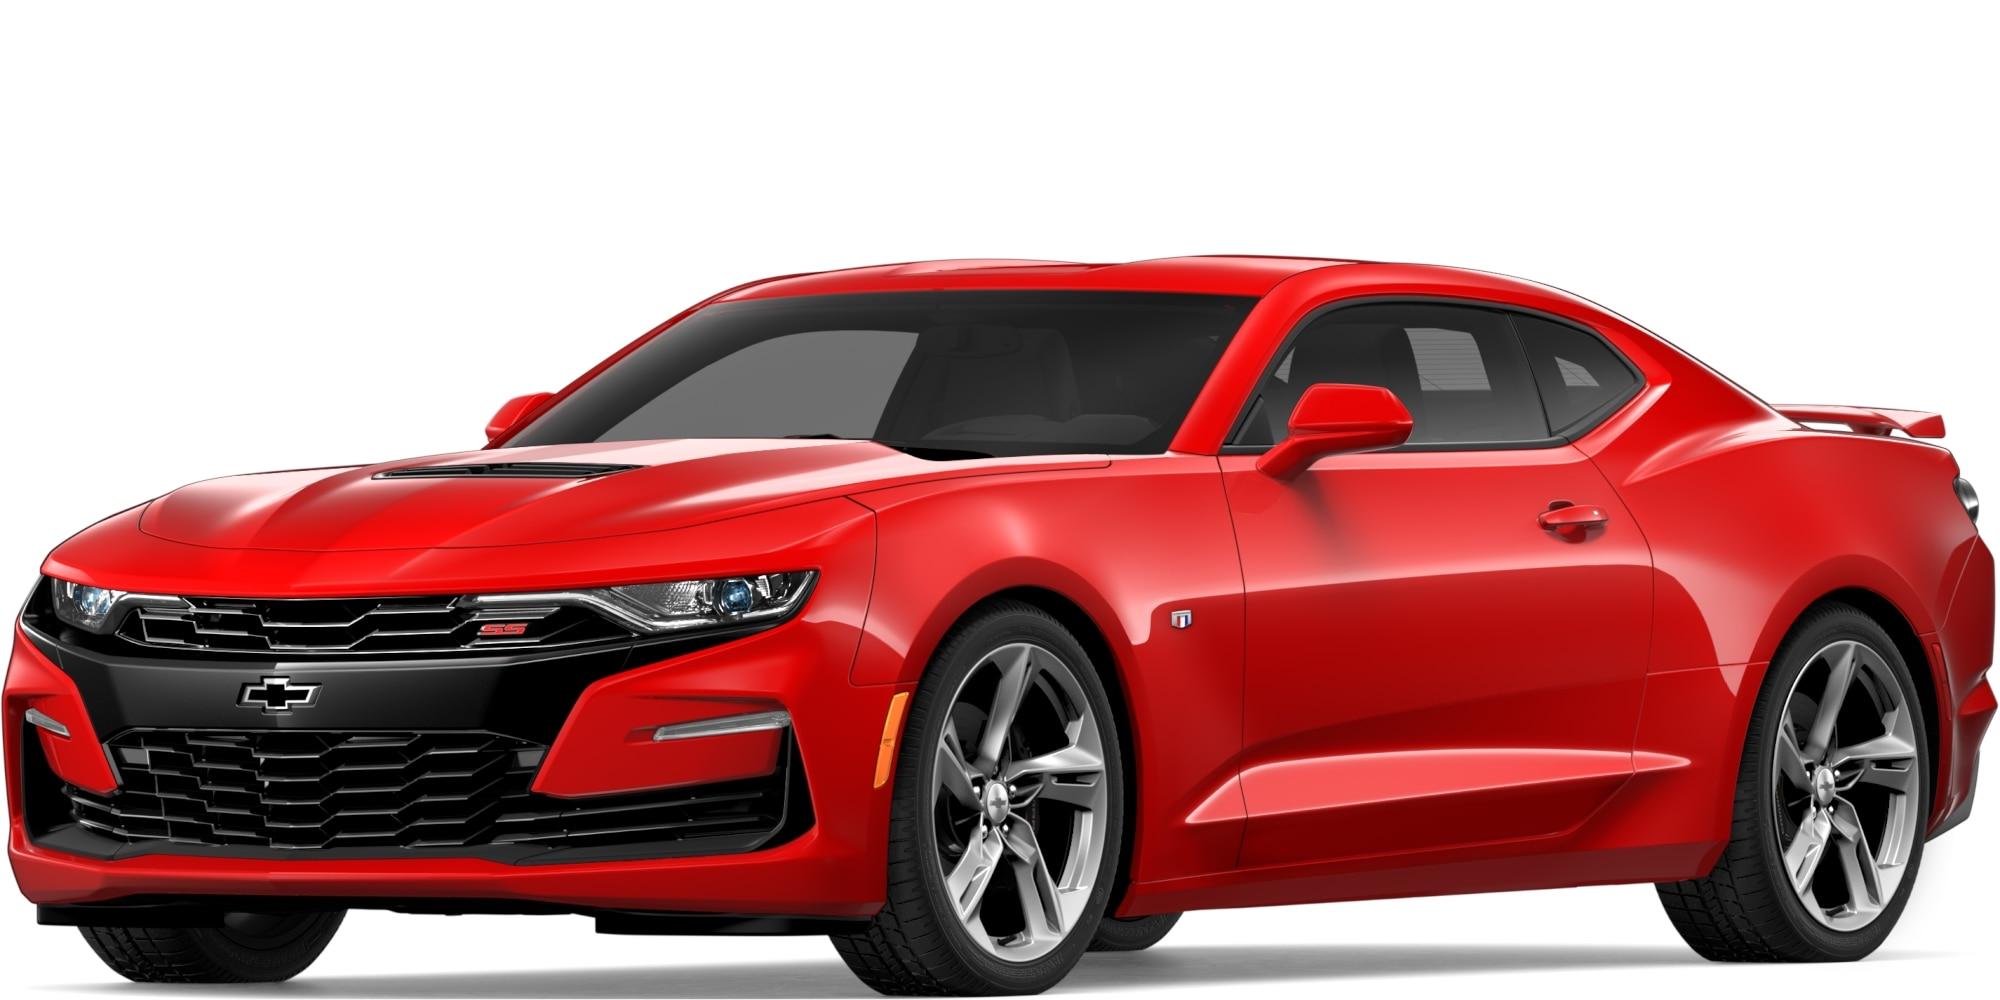 The New 2019 Camaro Sports Car: Coupe & Convertible